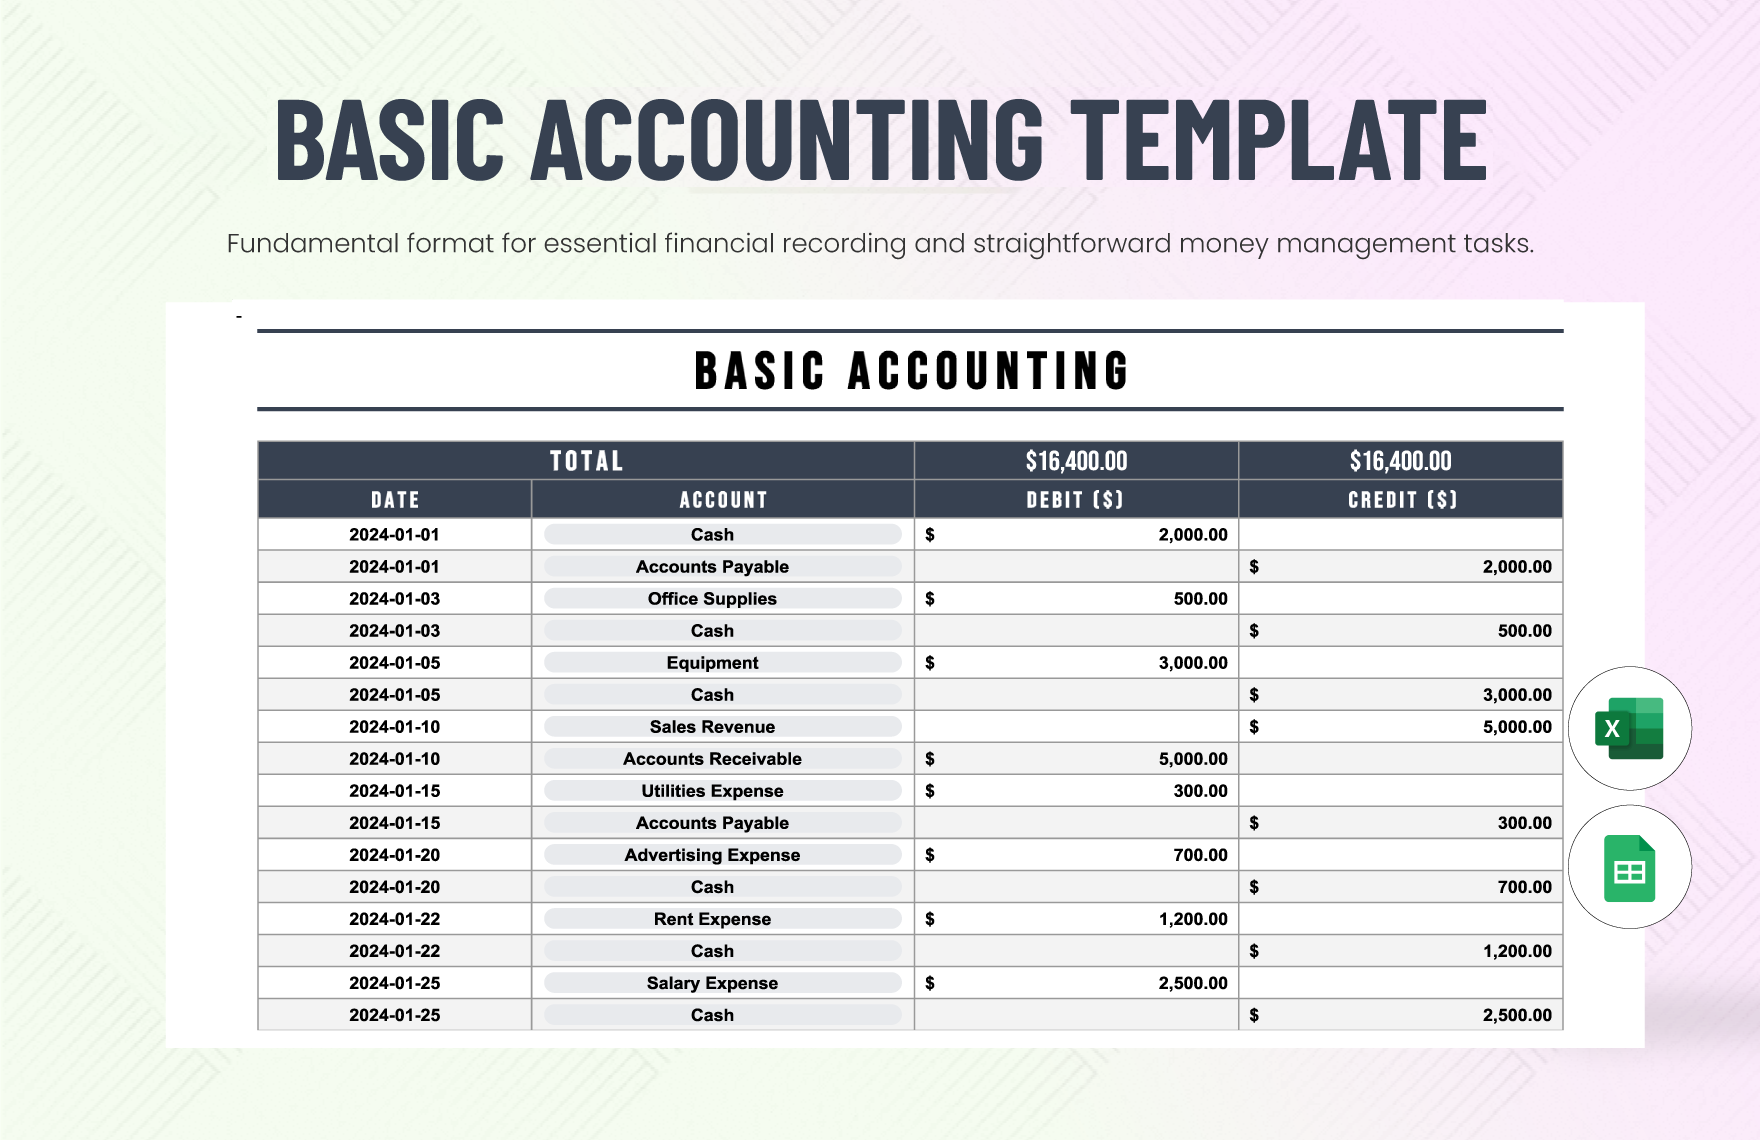 Basic Accounting Template